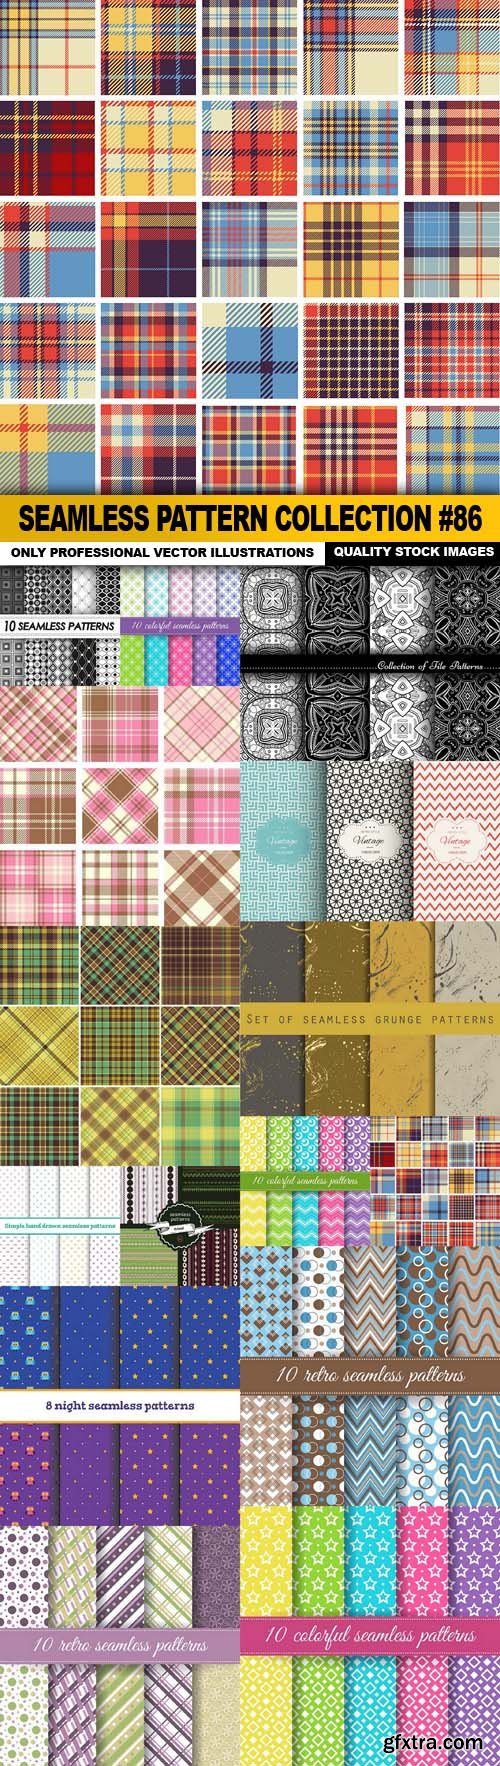 Seamless Pattern Collection #86 - 15 Vector